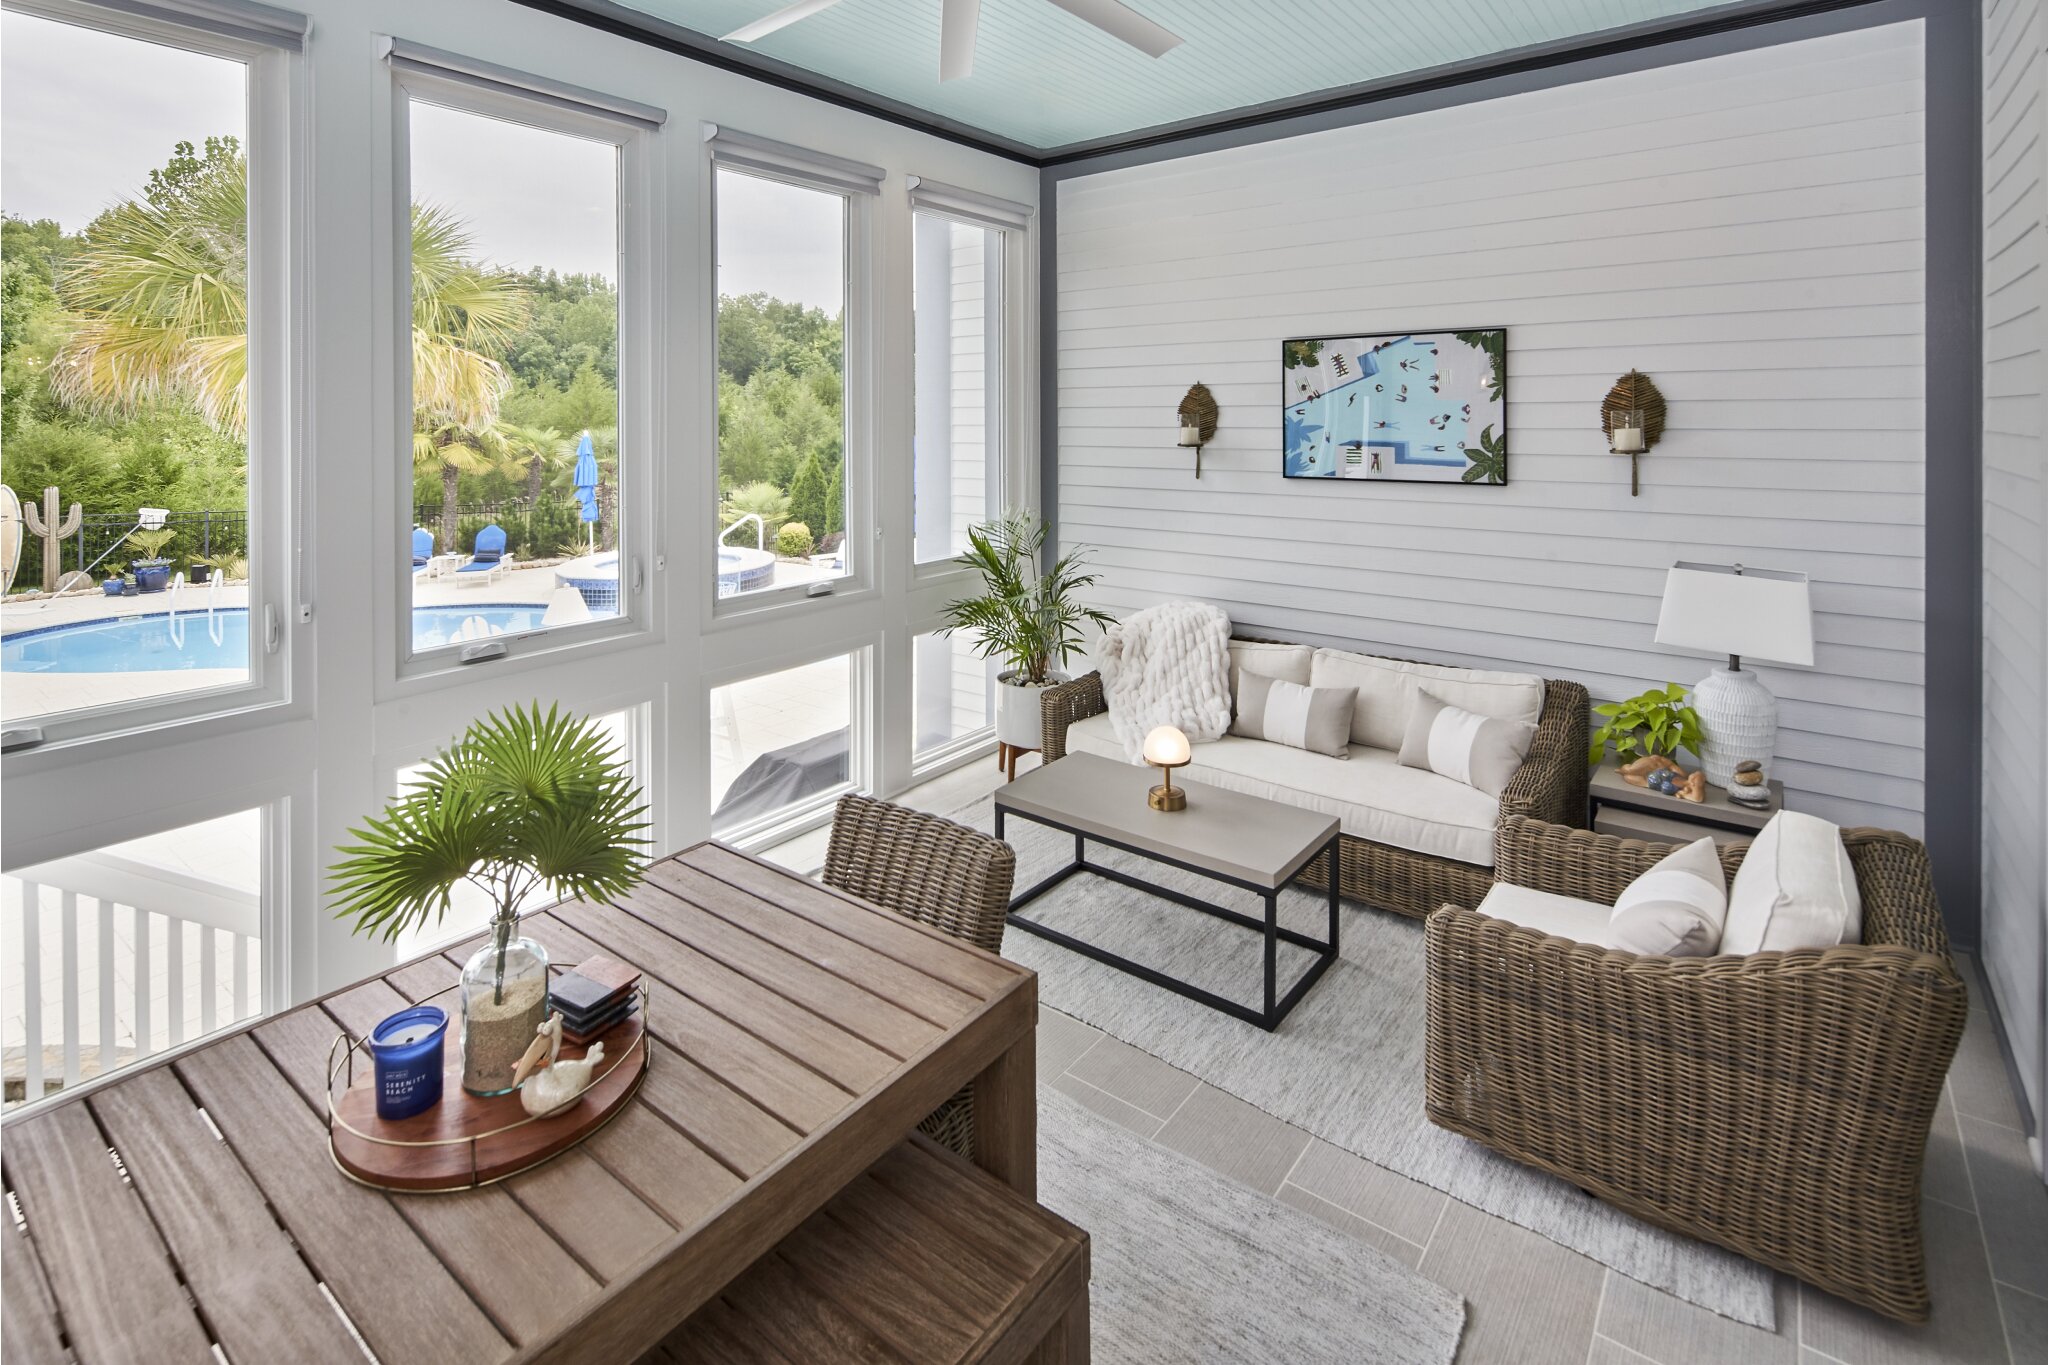 Bright updated sunroom with floor-to-ceiling windows overlooking outdoor pool